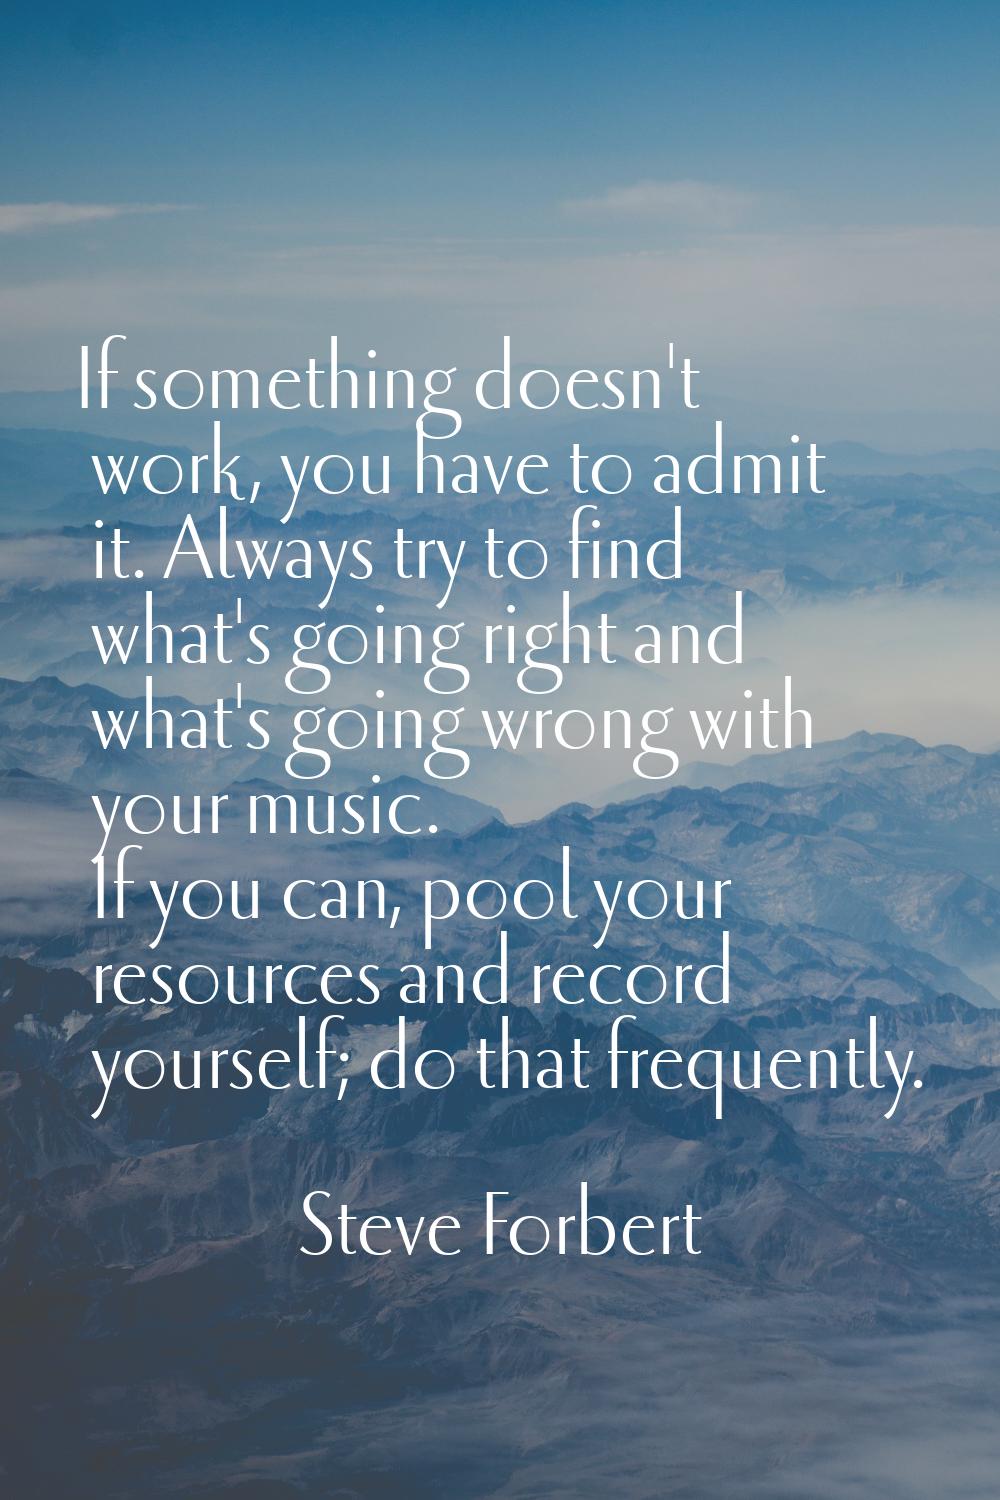 If something doesn't work, you have to admit it. Always try to find what's going right and what's g